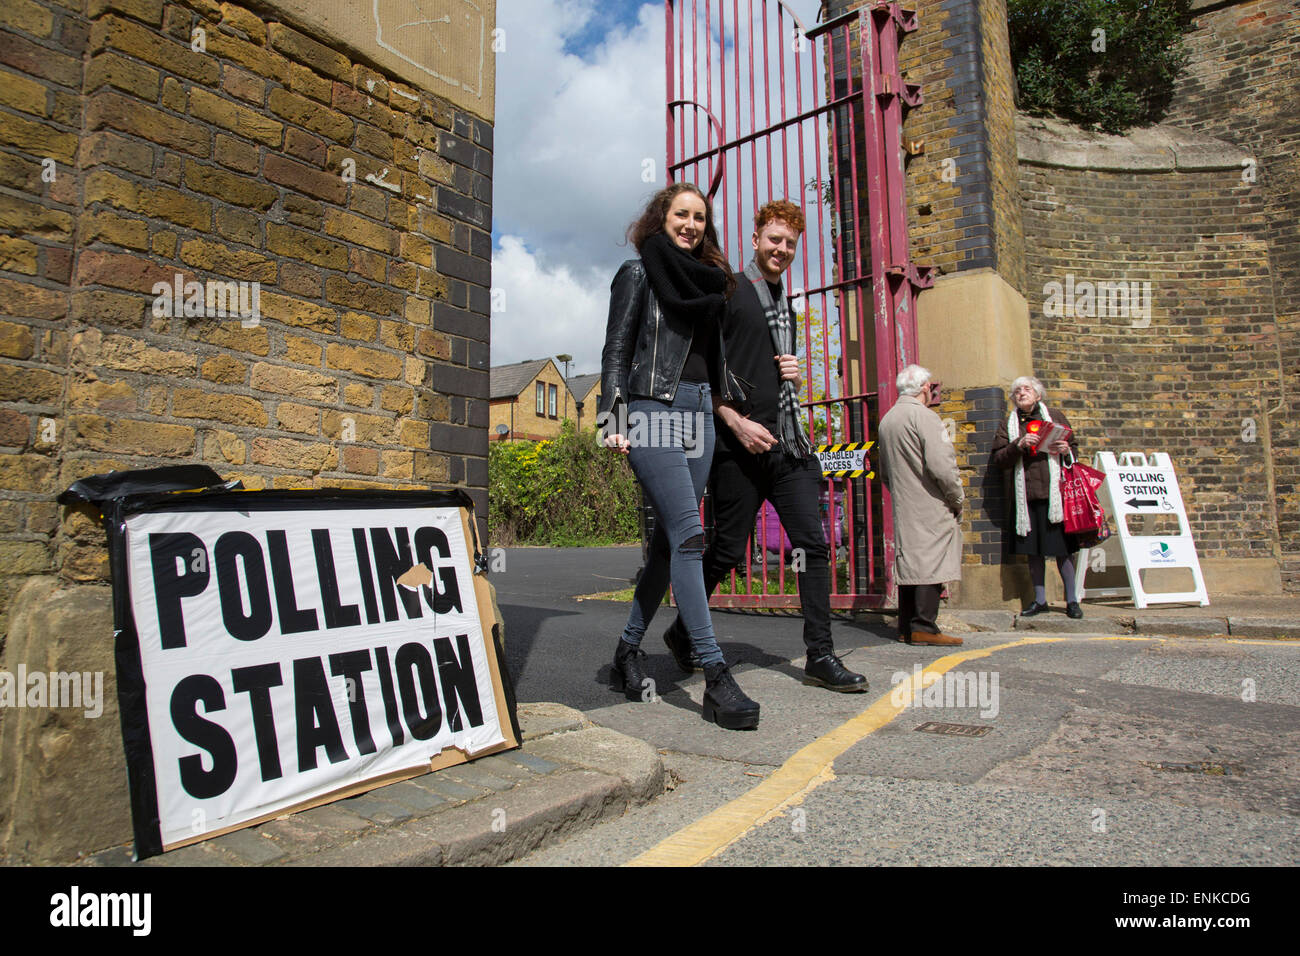 London, UK. 7th May, 2015. Voters attending a polling station at John Orwell Leisure Centre in the constituency of  Poplar and Limehouse in East London on the day of the general election. This is a Labour Party seat, although this electin is set to be one of the most hotly contested in a generation. Credit:  Michael Kemp/Alamy Live News Stock Photo